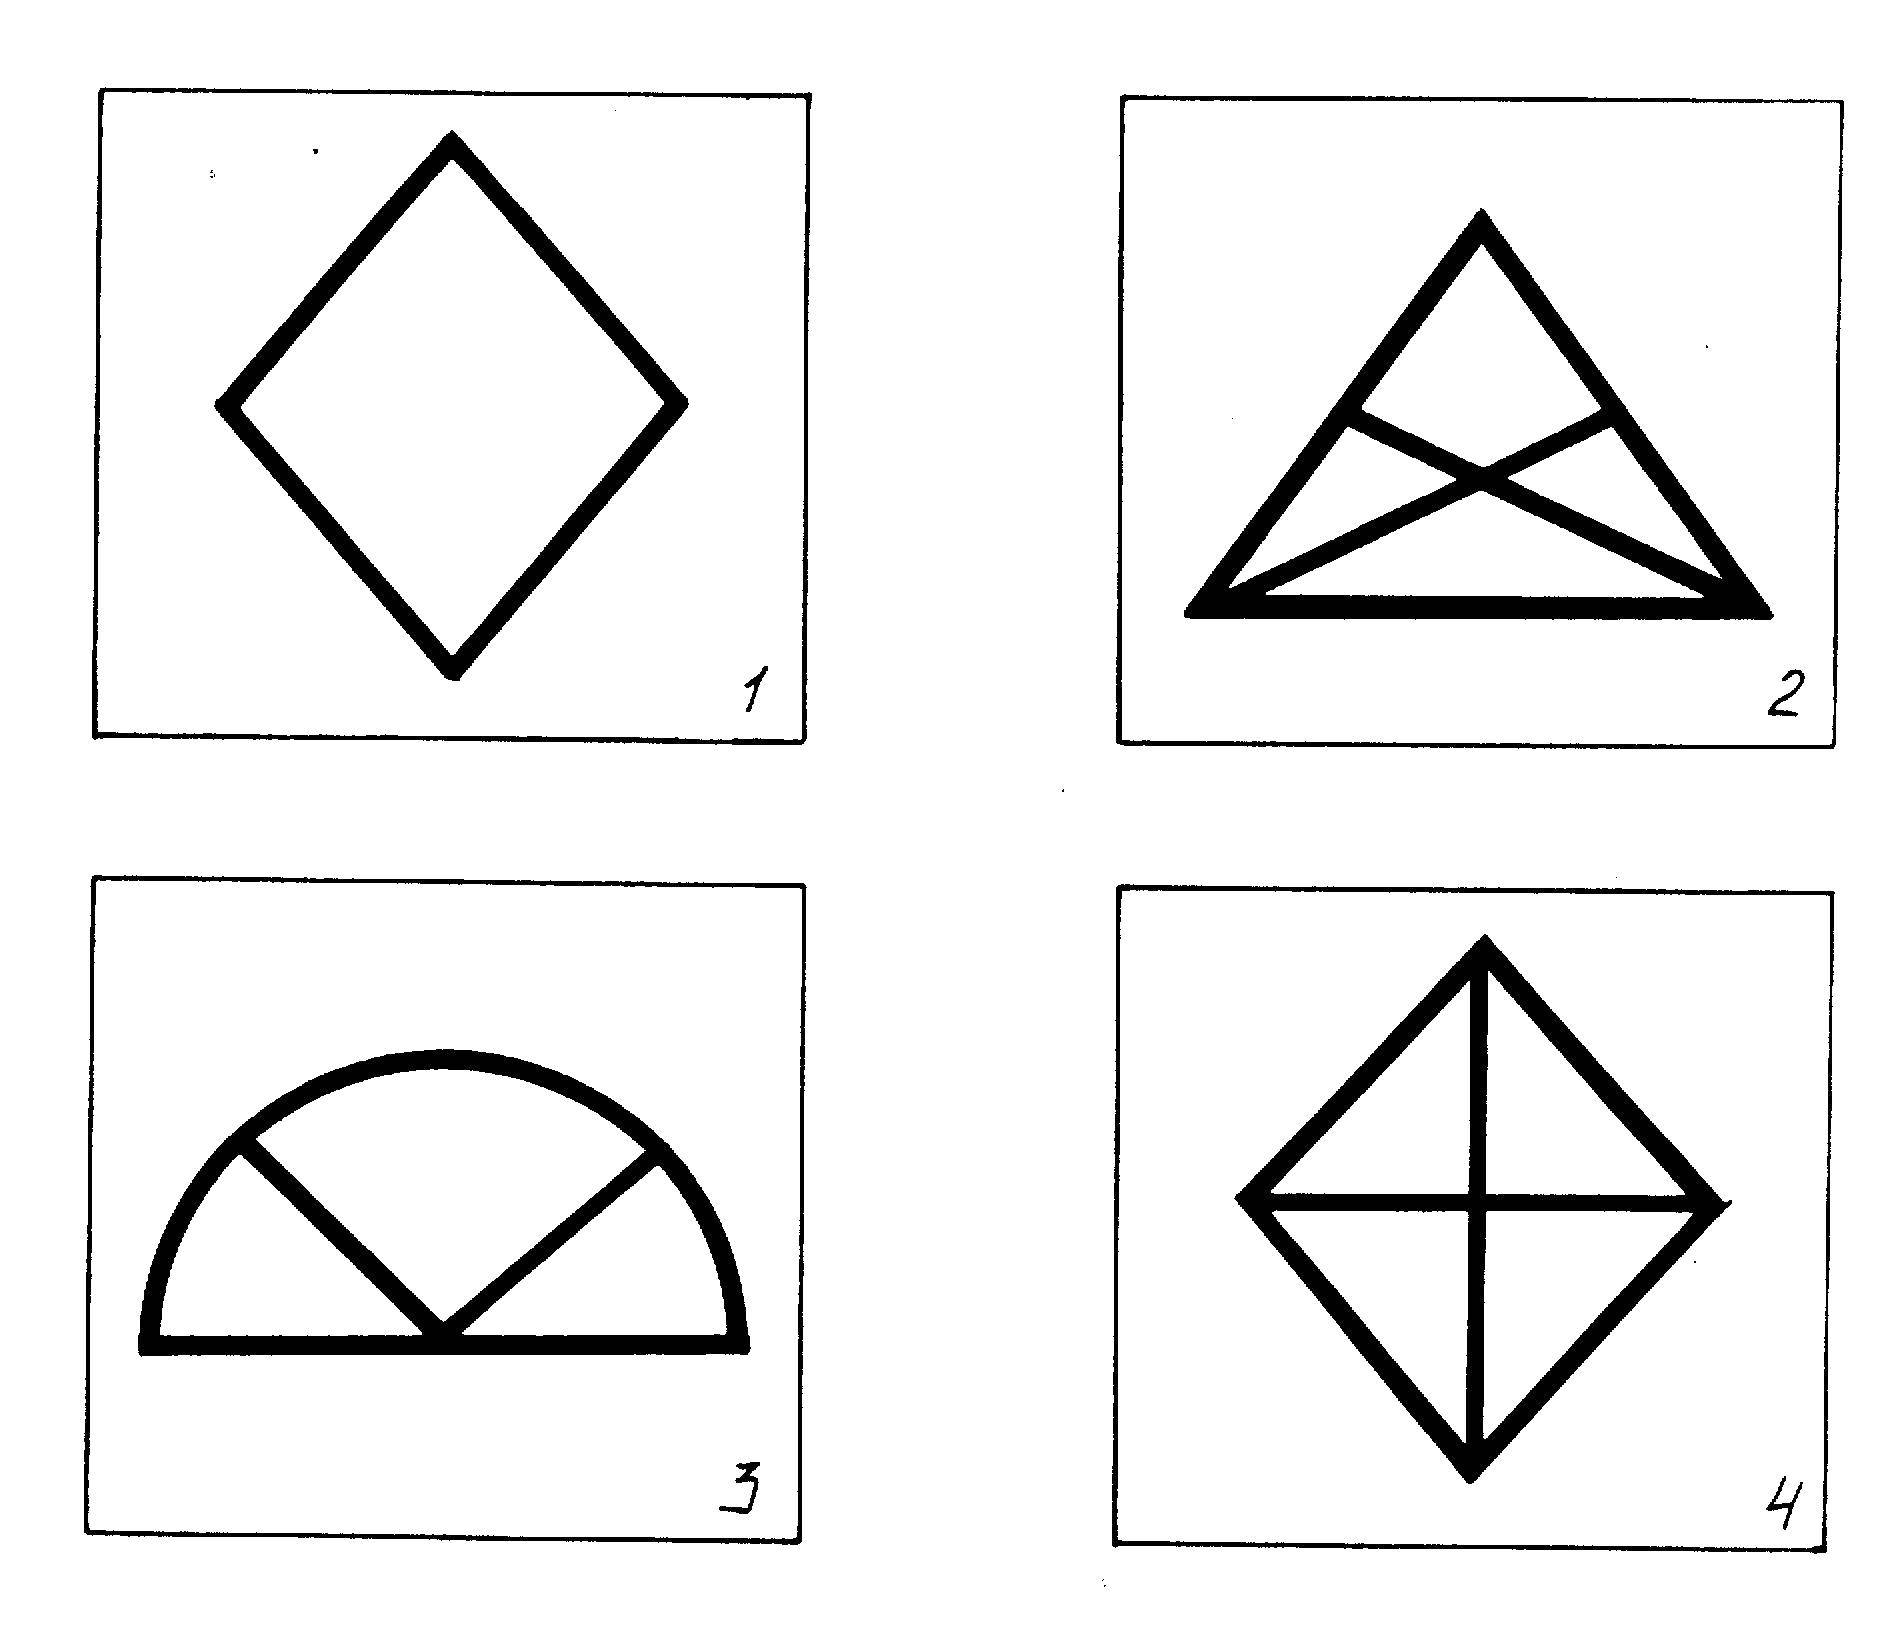 Coloring Triangular shapes. Category shapes. Tags:  shapes.